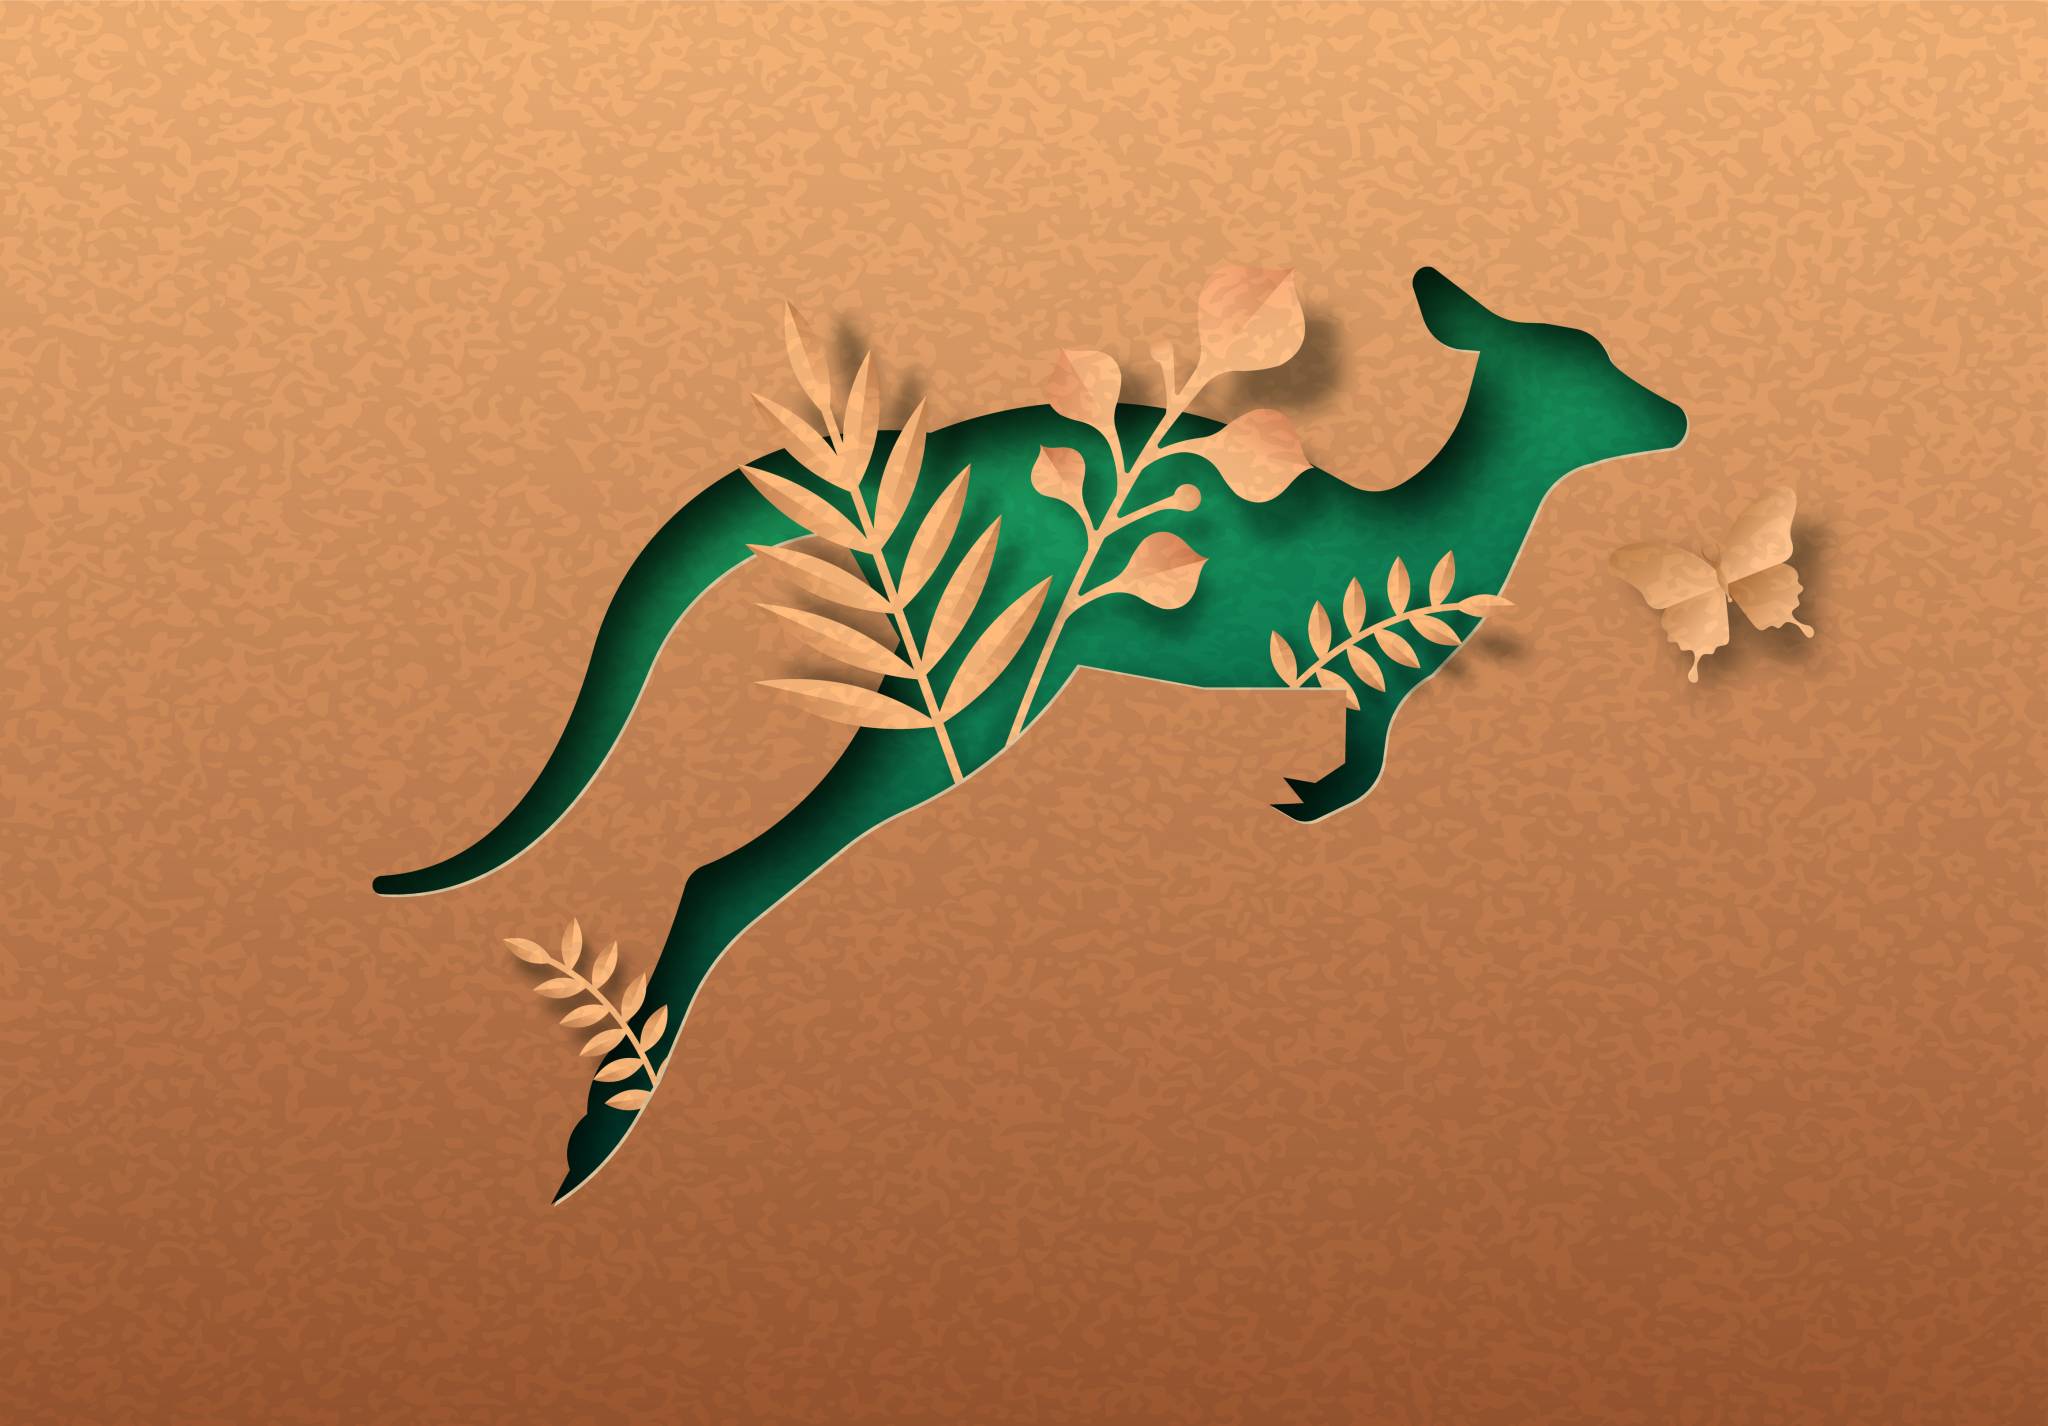 A captivating paper art showcasing an Australian kangaroo, beautifully crafted with intricate details